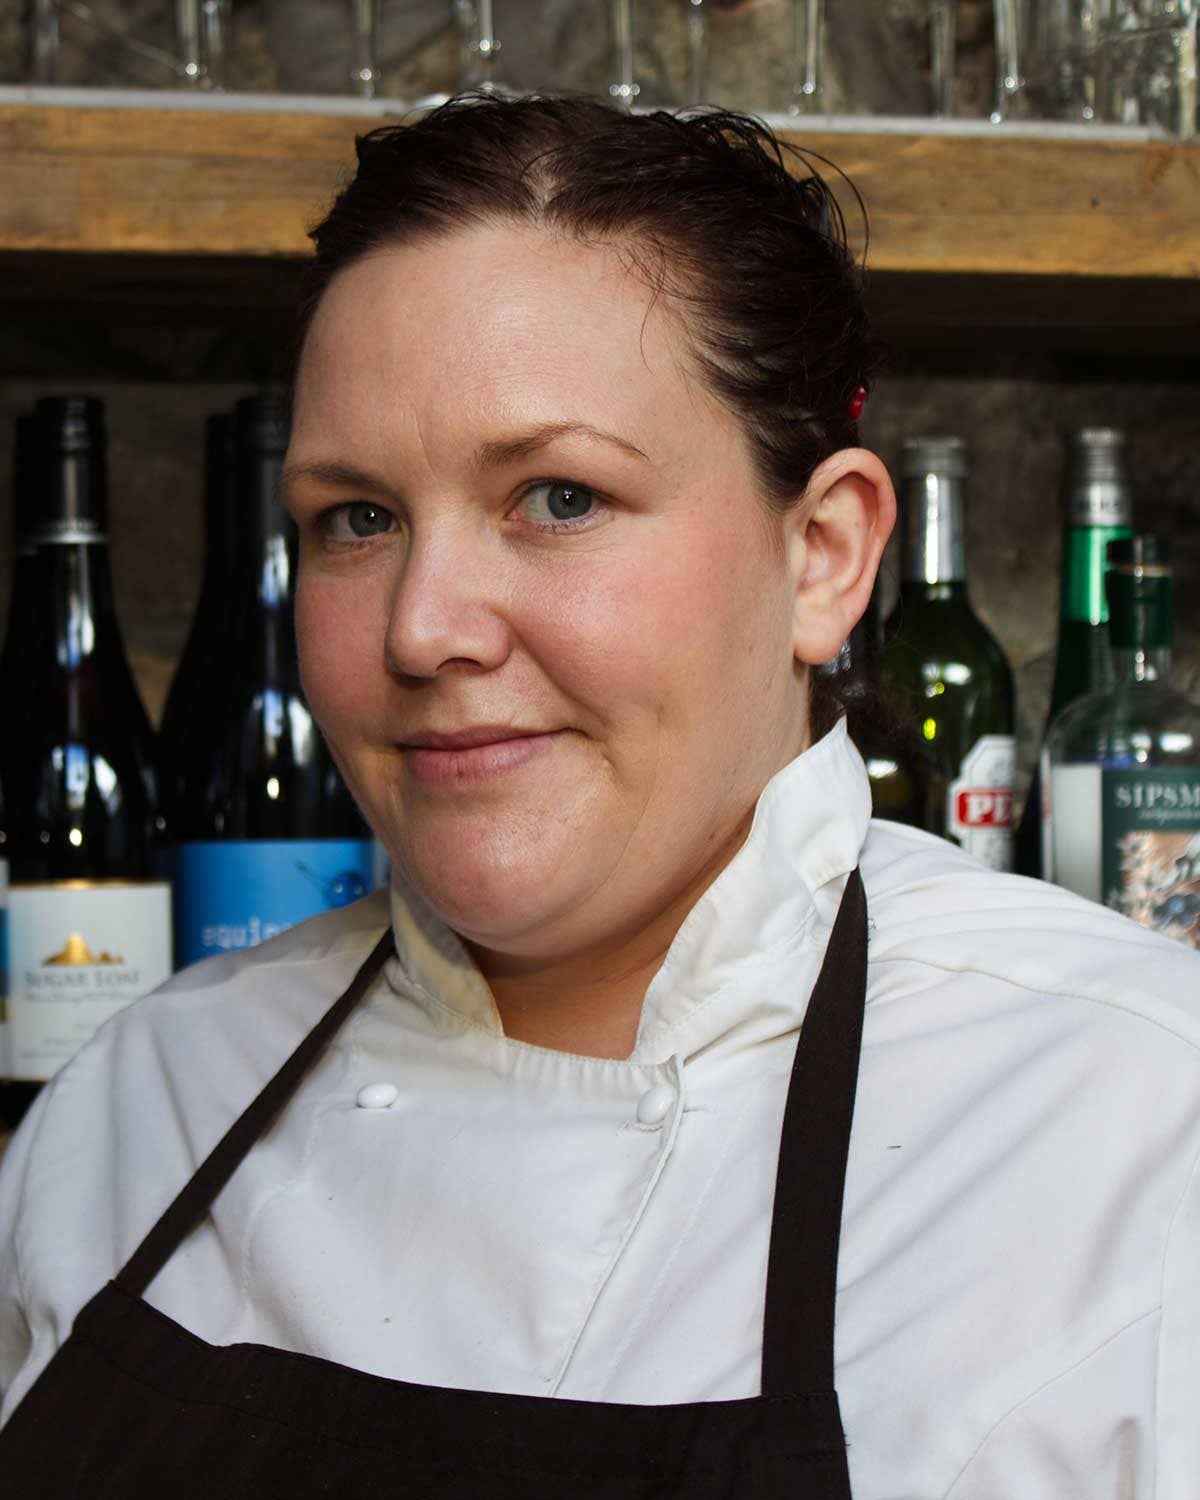 An Irish Chef is Proving Her Country Doesn’t Have a Shortage of Great Women Running Restaurants